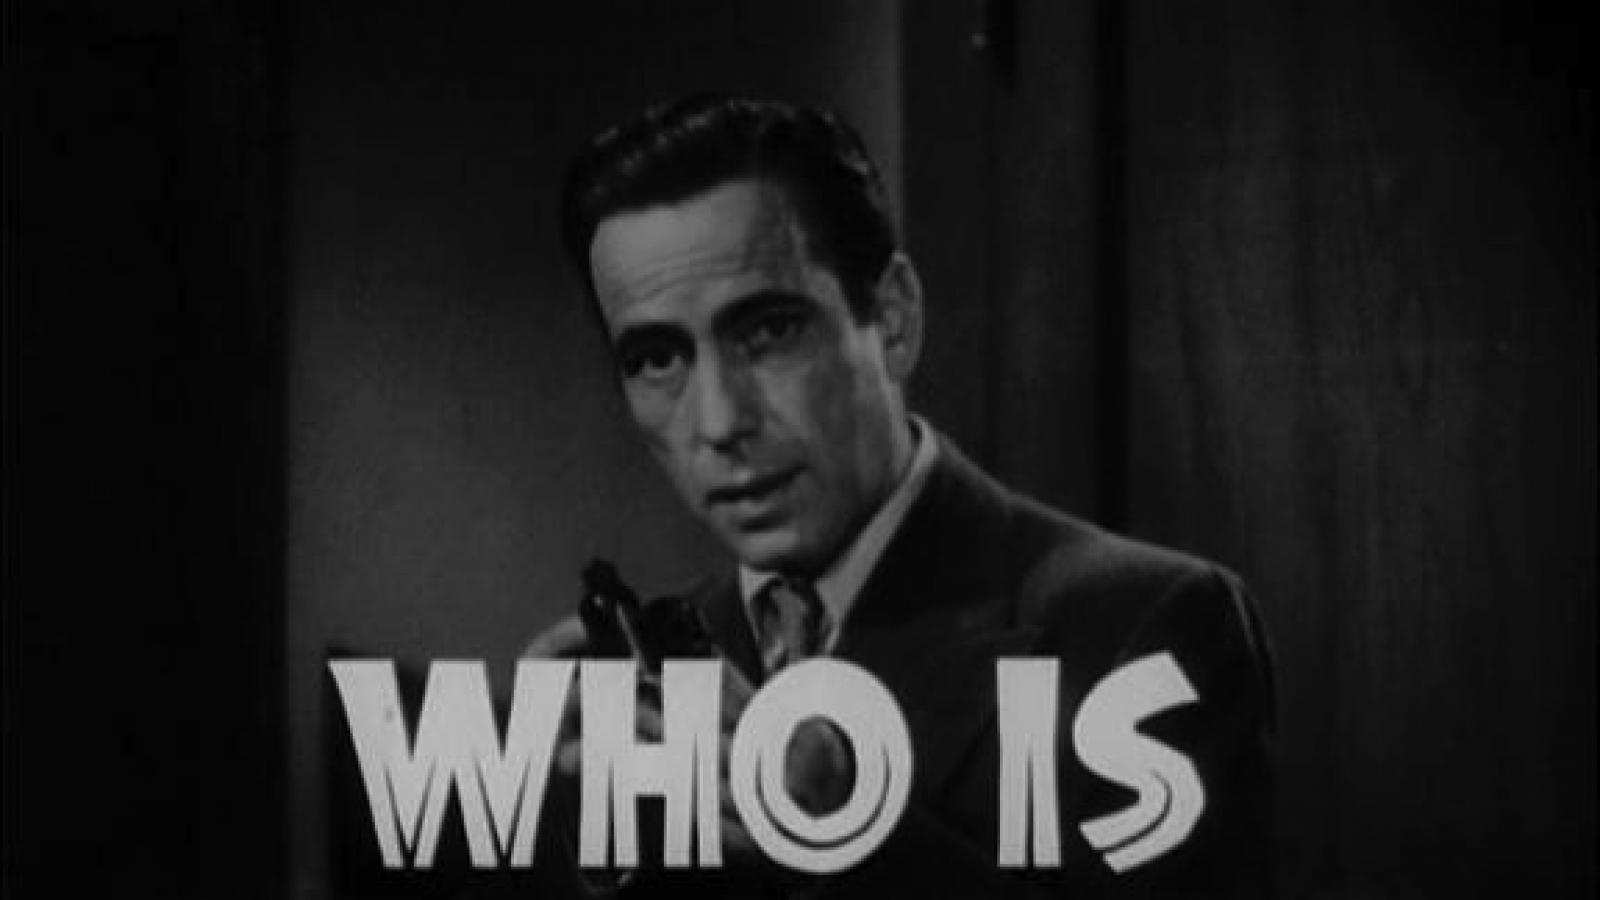 Image of Humphrey Bogart from the Maltese Falcon